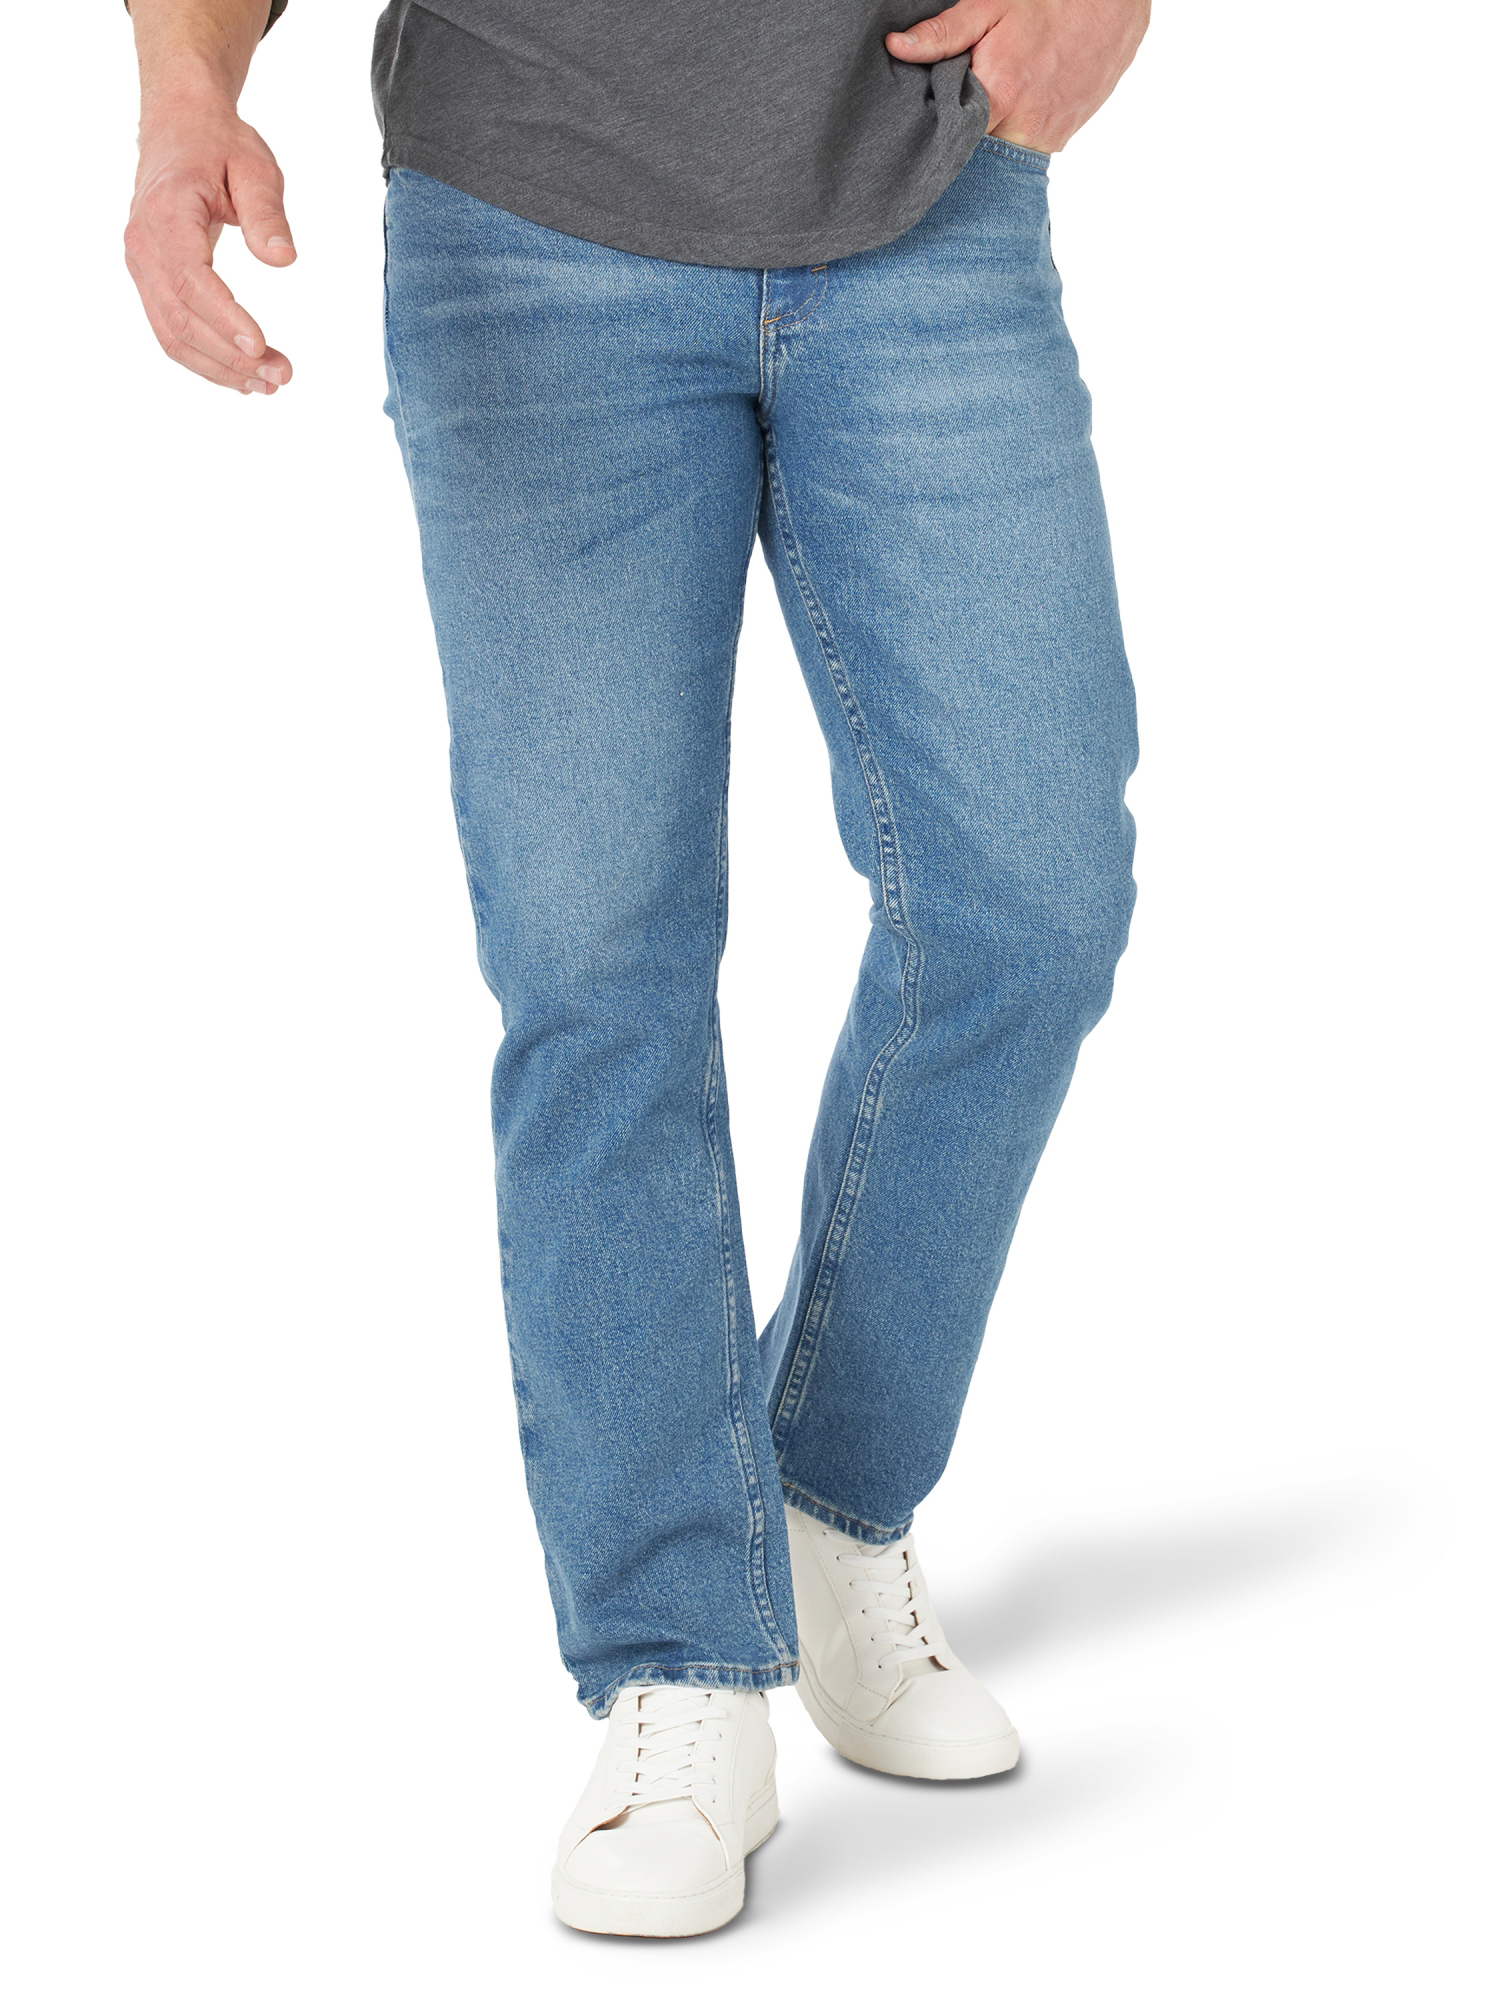 Wrangler Men's and Big Men's Relaxed Fit Jeans with Flex - image 1 of 7